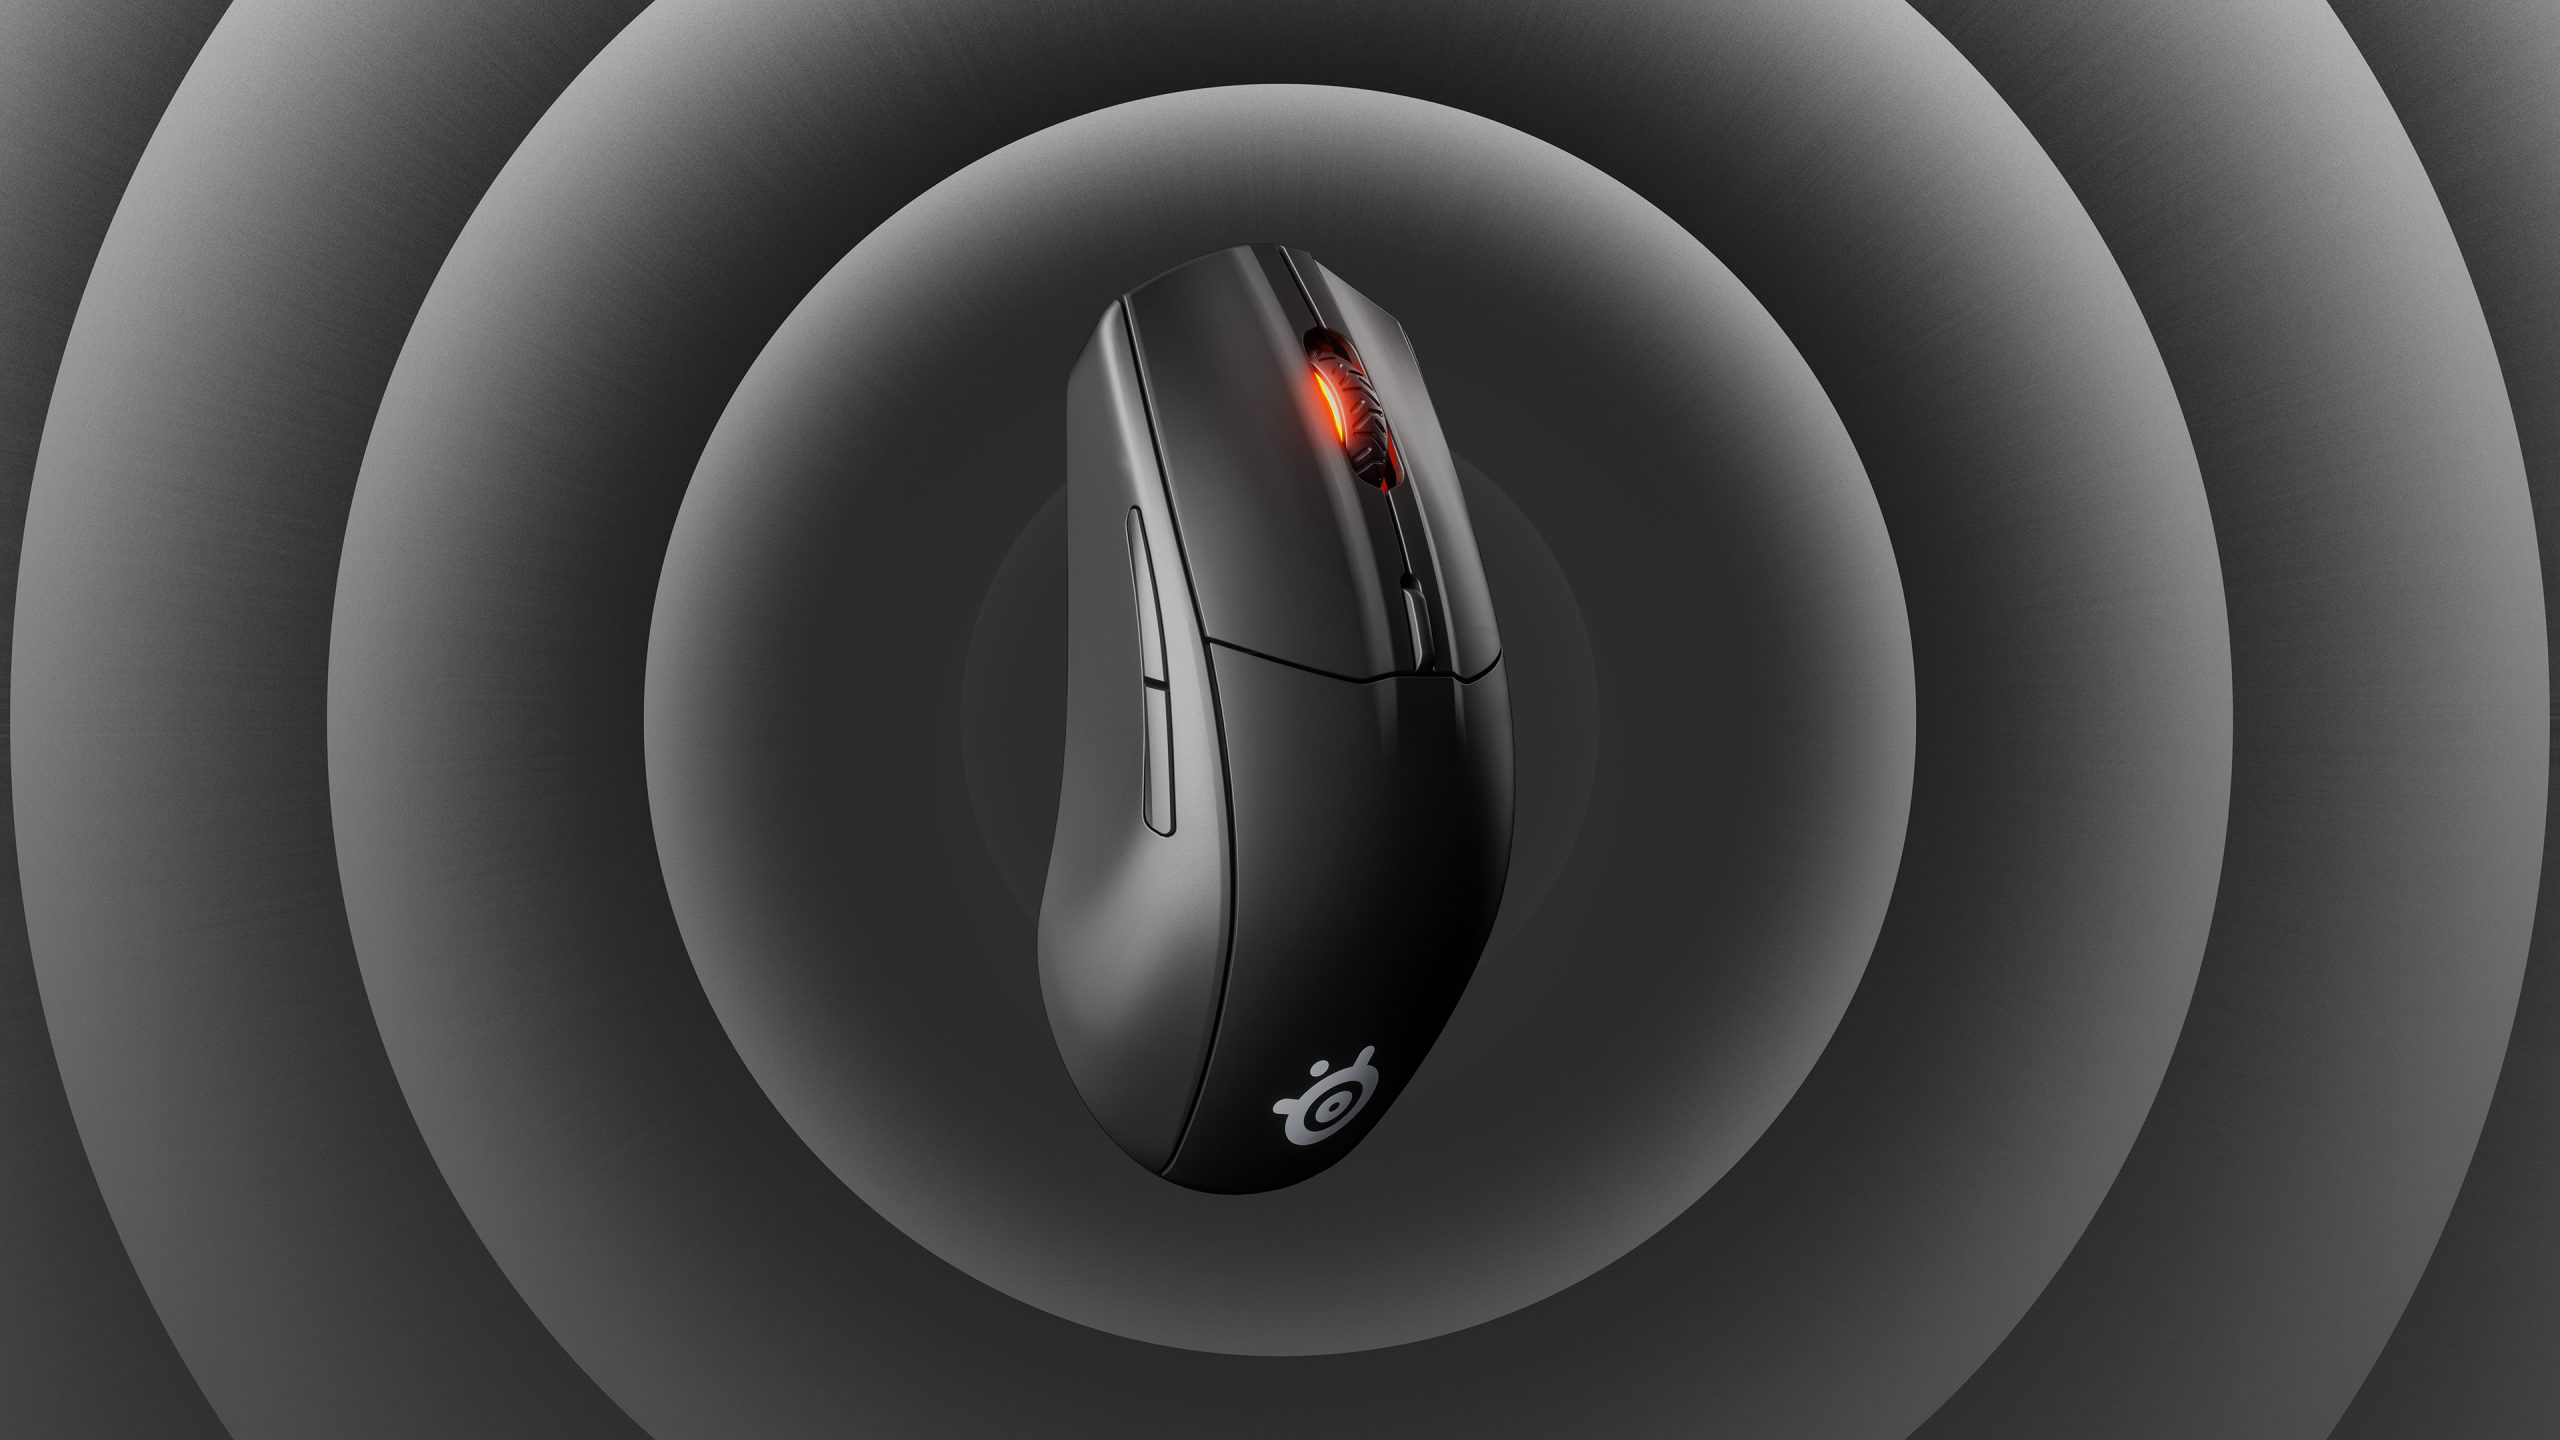 rival 3 wireless mouse